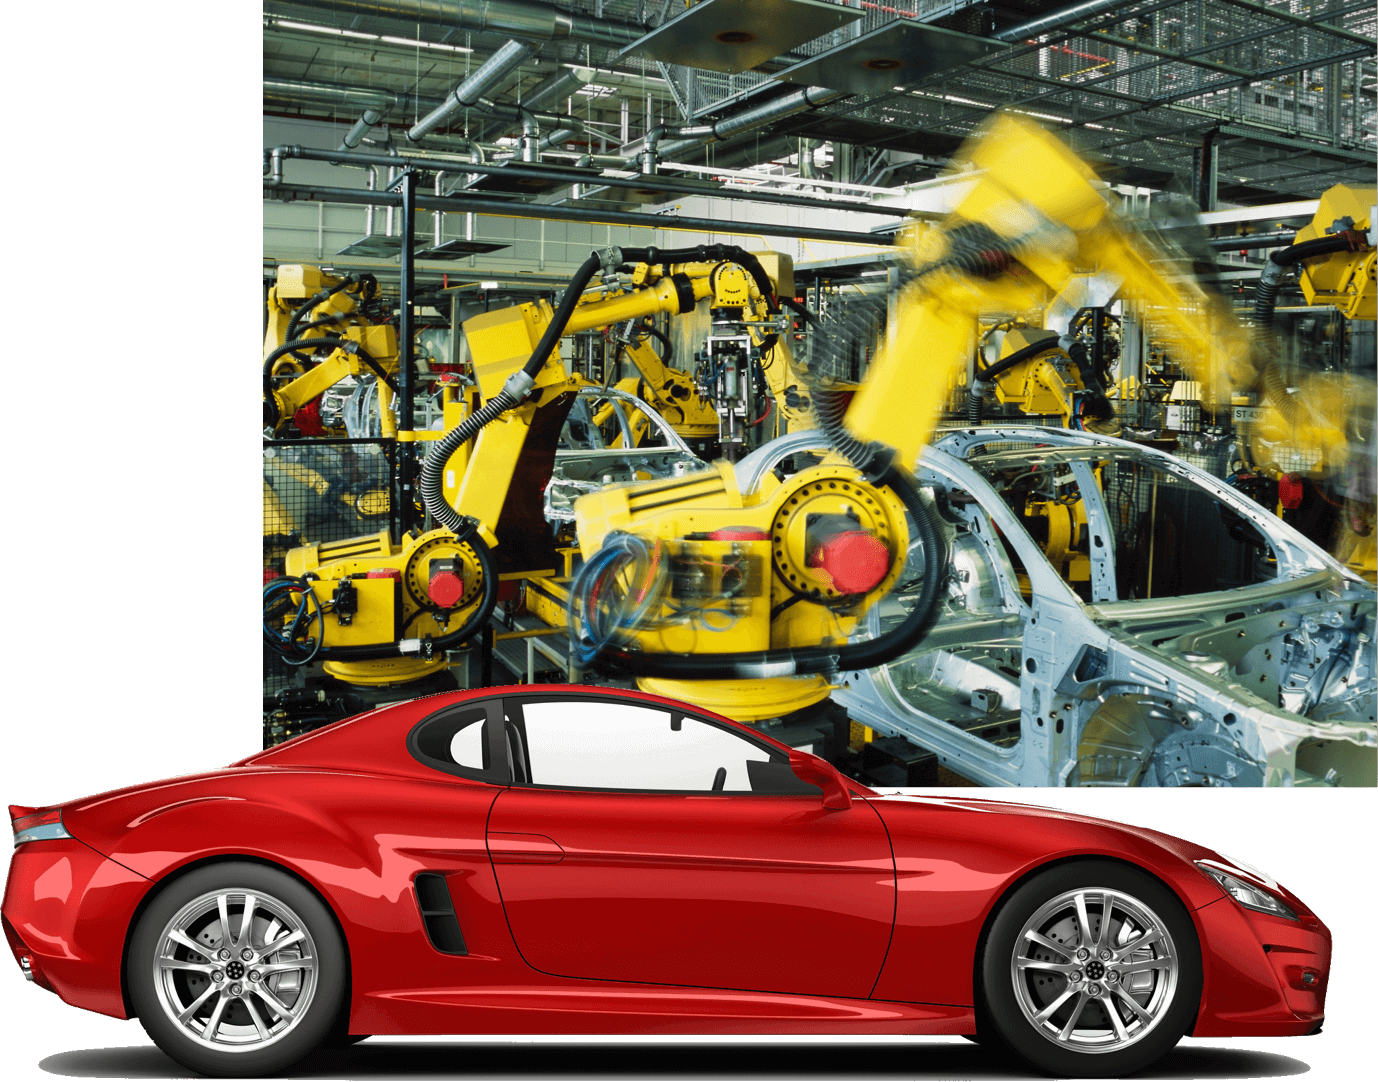 Automotive manufacturing facility - Methods develops CNC machining, automation, and engineering solutions for manufacturers in multiple industrial sectors, including automotive parts production